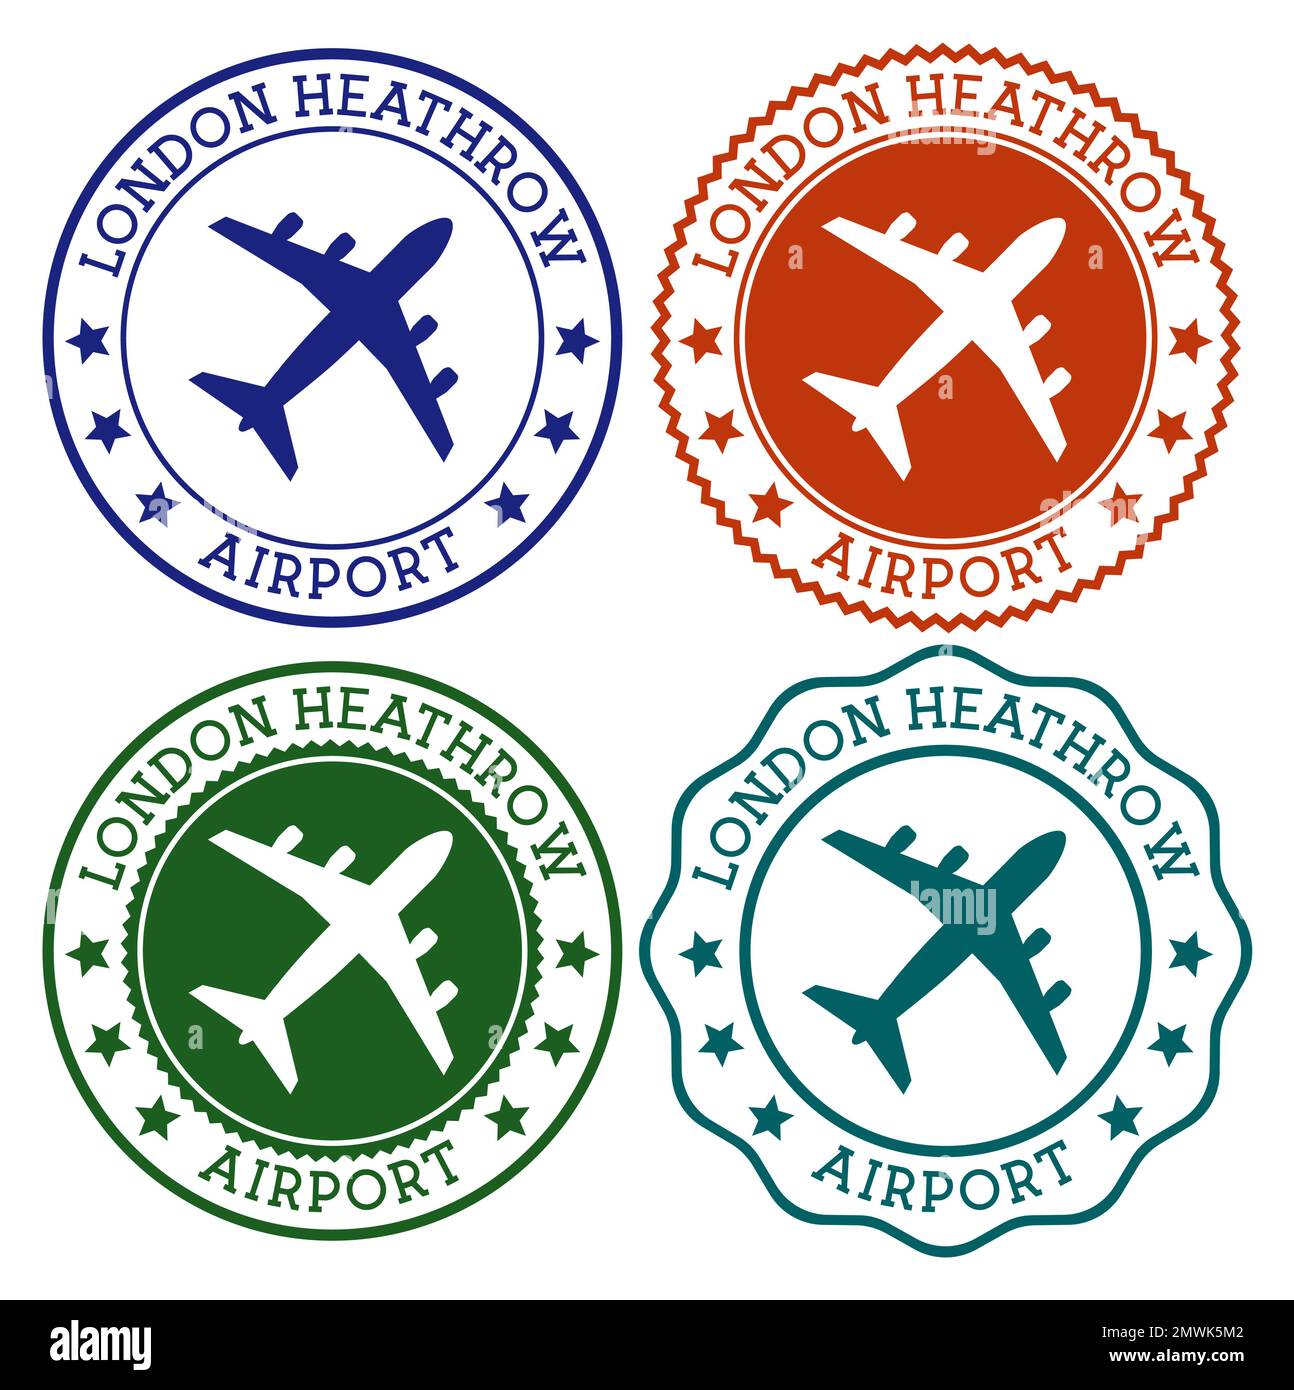 London Heathrow Airport. London airport logo. Flat stamps in material color palette. Vector illustration. Stock Vector